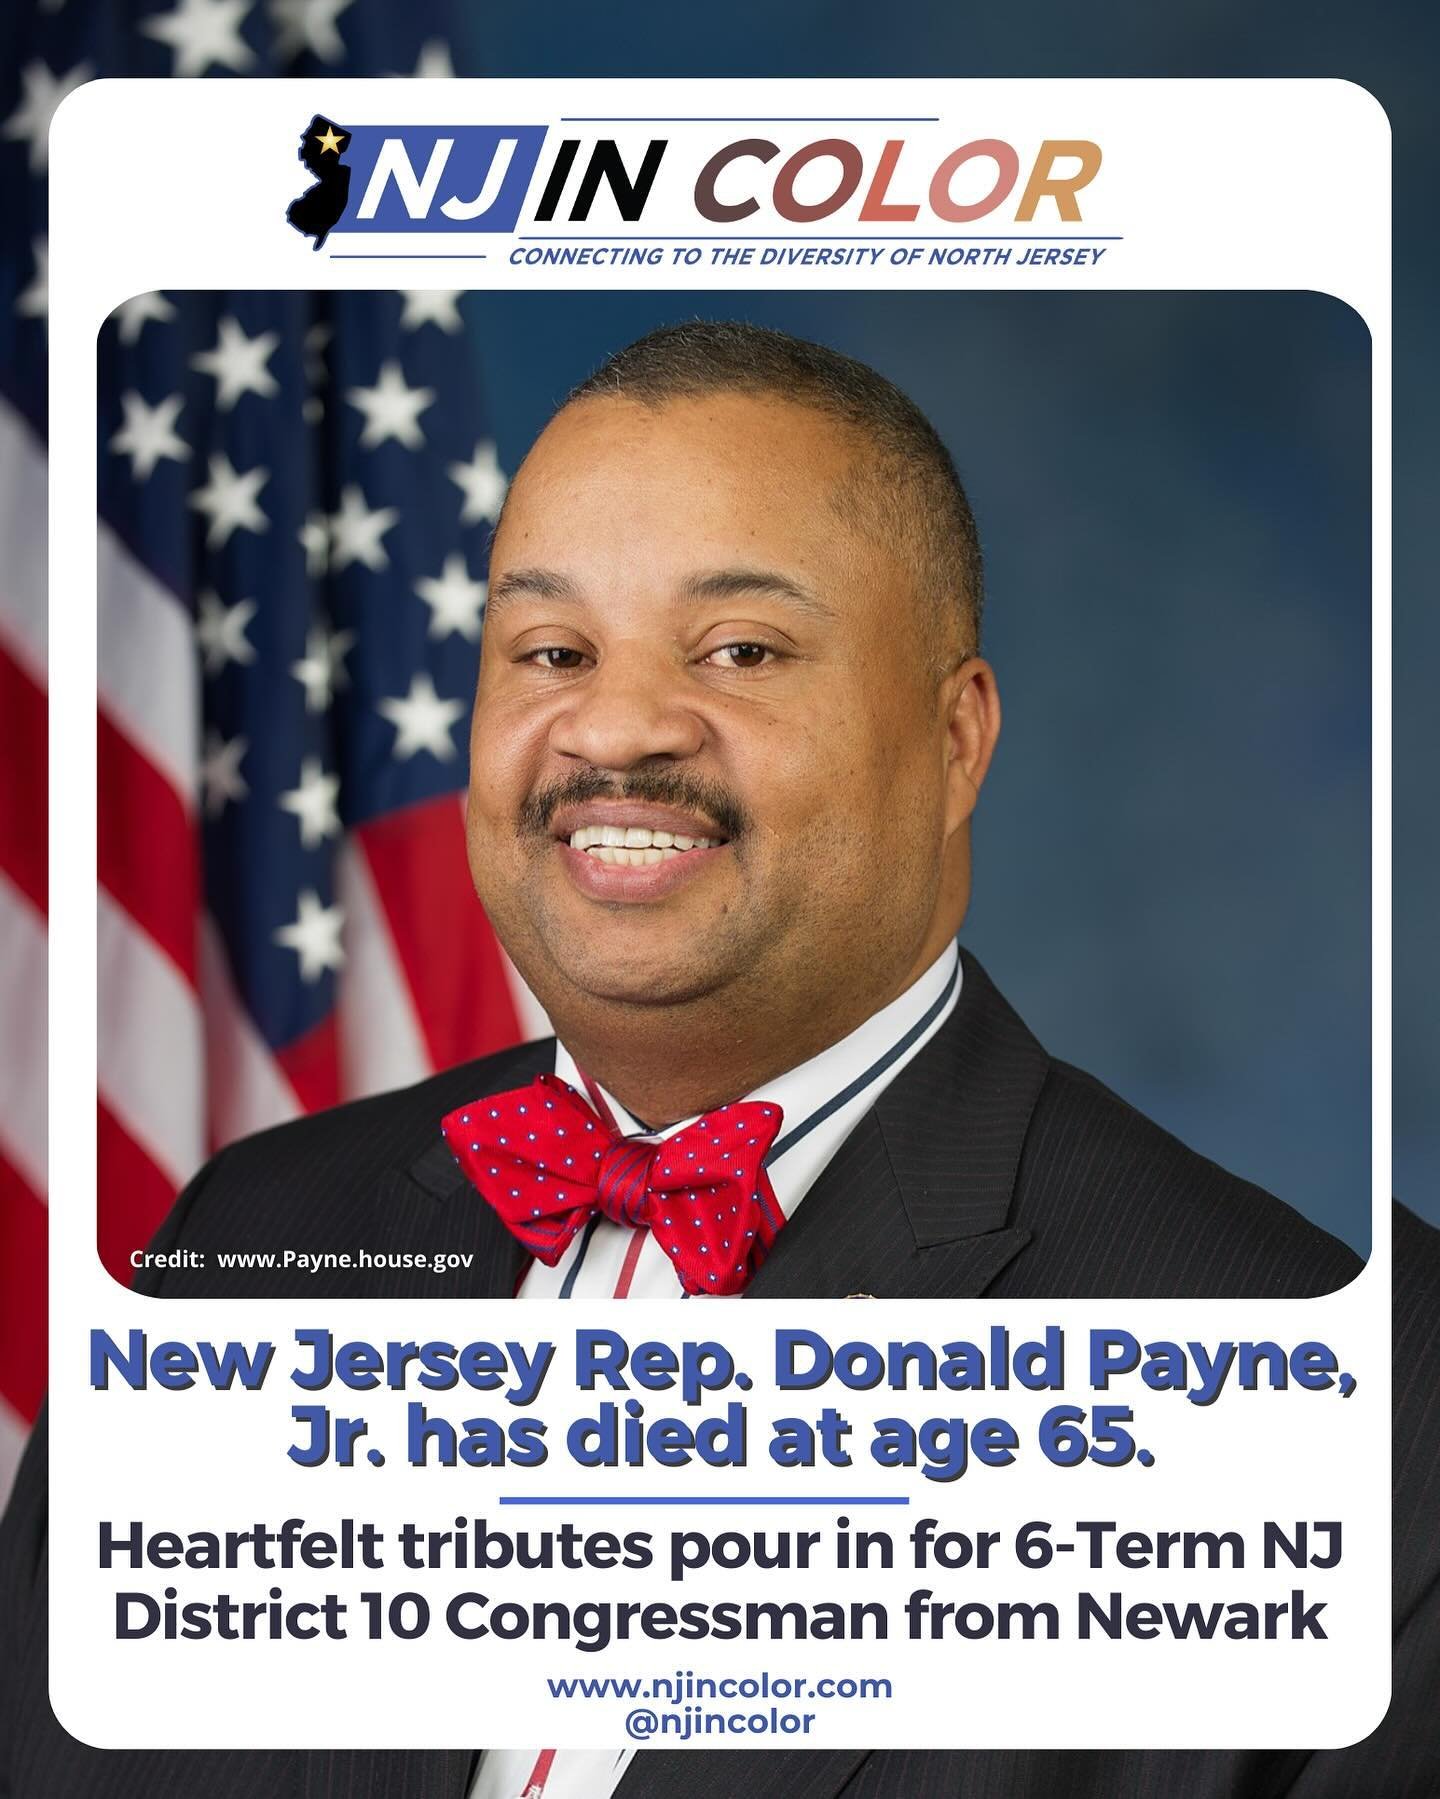 IN LOVING MEMORY: National and Local leaders share their thoughts on the passing of Representative Donald M. Payne, Jr. 

Our thoughts and prayers are with his family, friends, colleagues, and the people of NJ Congressional District 10 (Newark, Orang